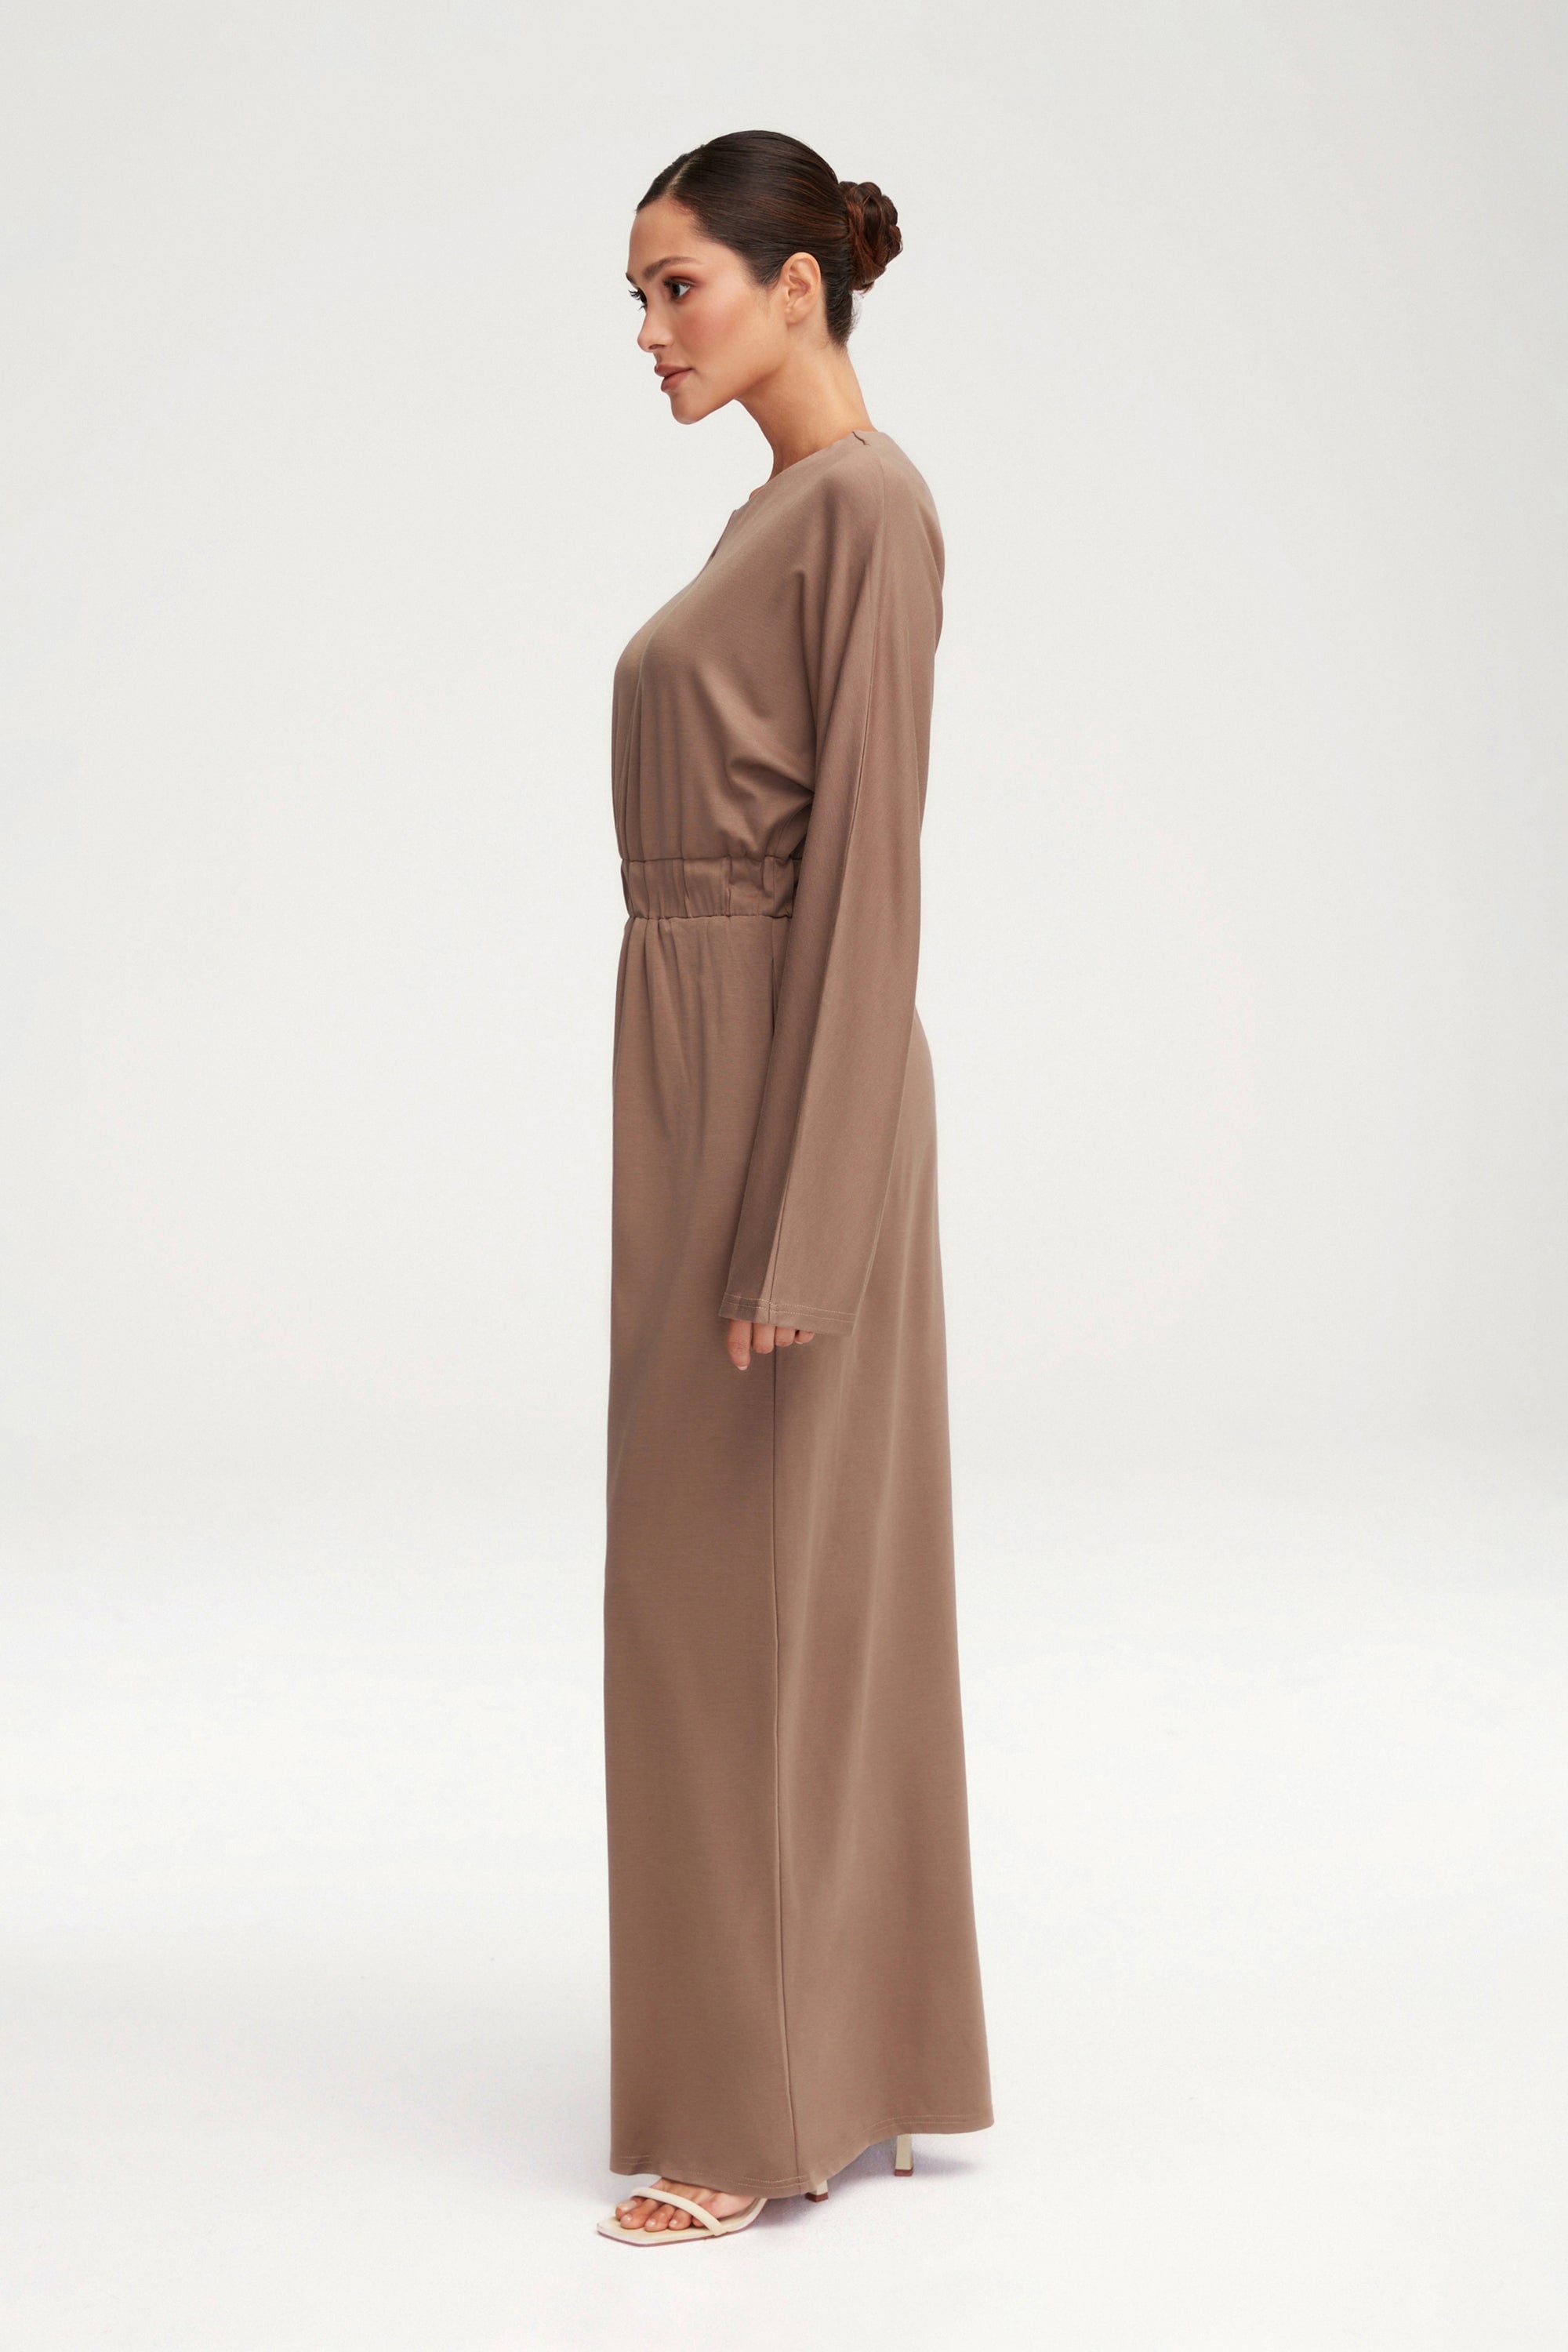 Adelynn Jersey Batwing Maxi Dress - Taupe Clothing epschoolboard 